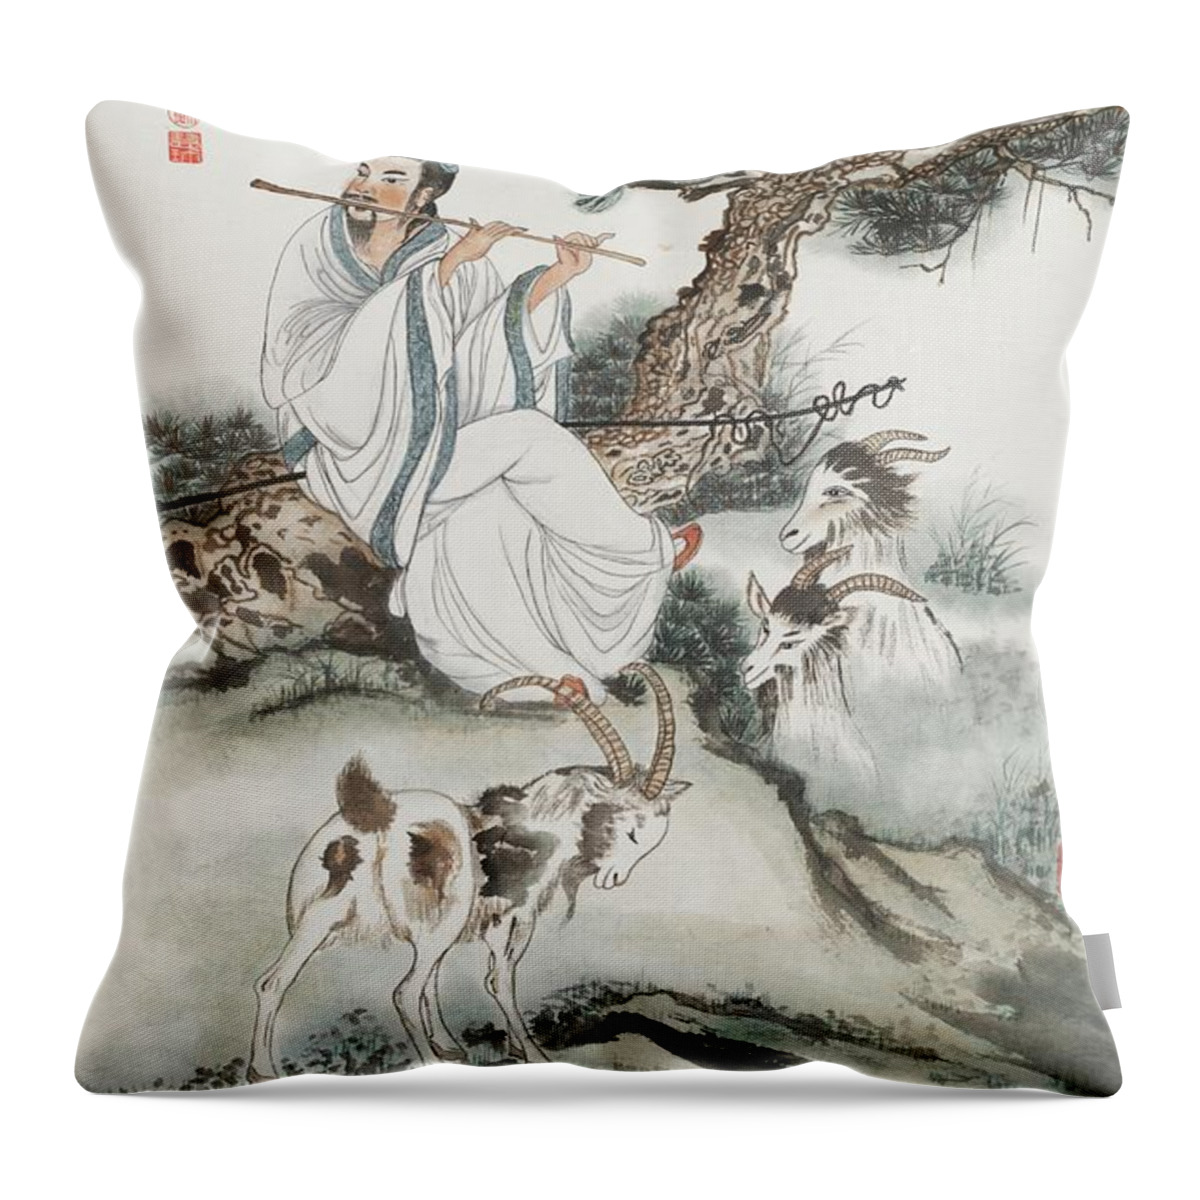 Chinese Watercolor Throw Pillow featuring the painting Shepherd Serenading His Goats by Jenny Sanders